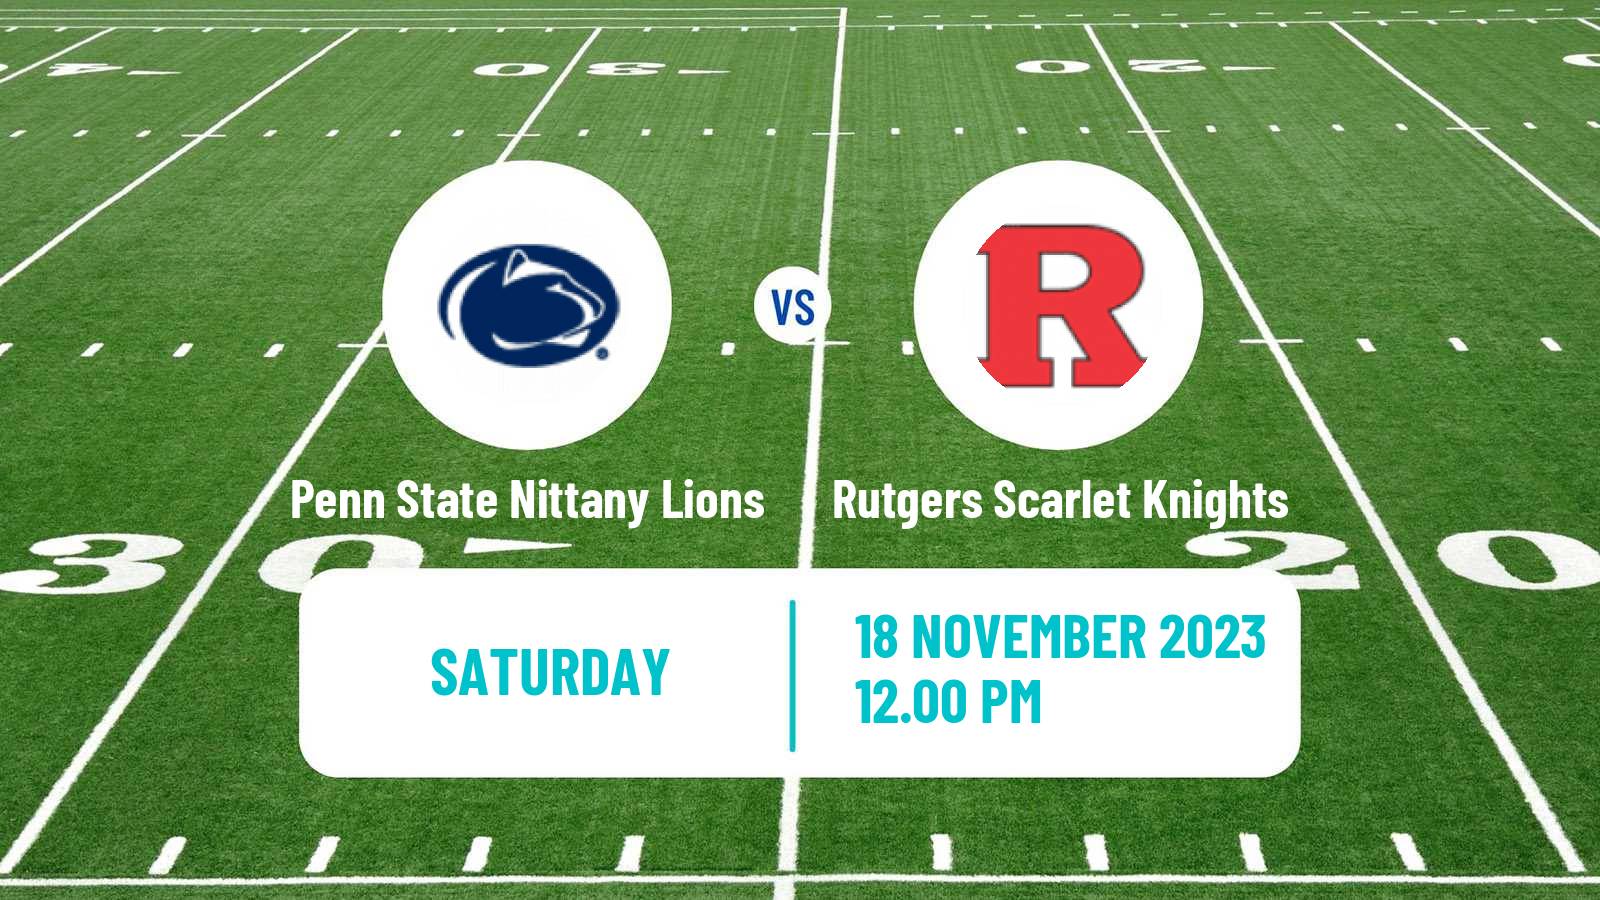 American football NCAA College Football Penn State Nittany Lions - Rutgers Scarlet Knights